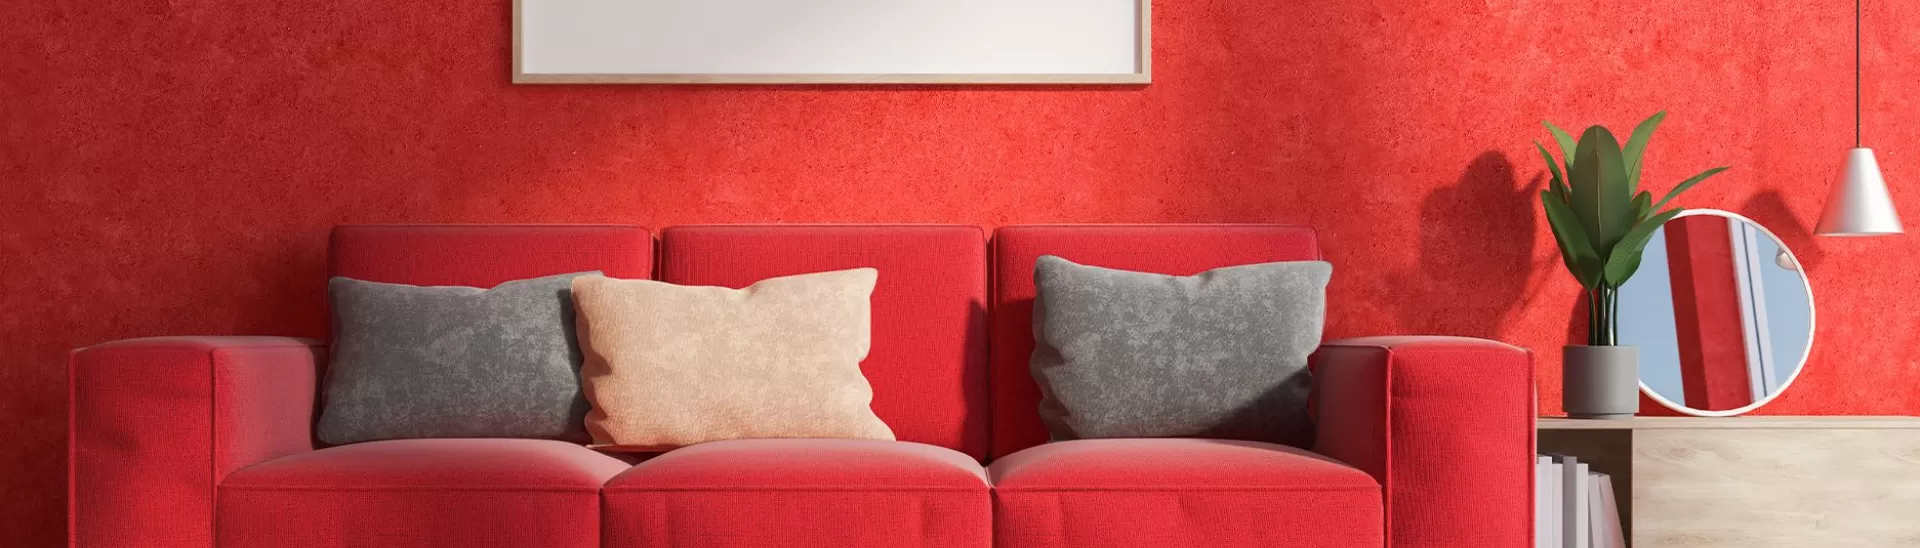 5 Different Shades of Red Wall Paint Colour for Your Home